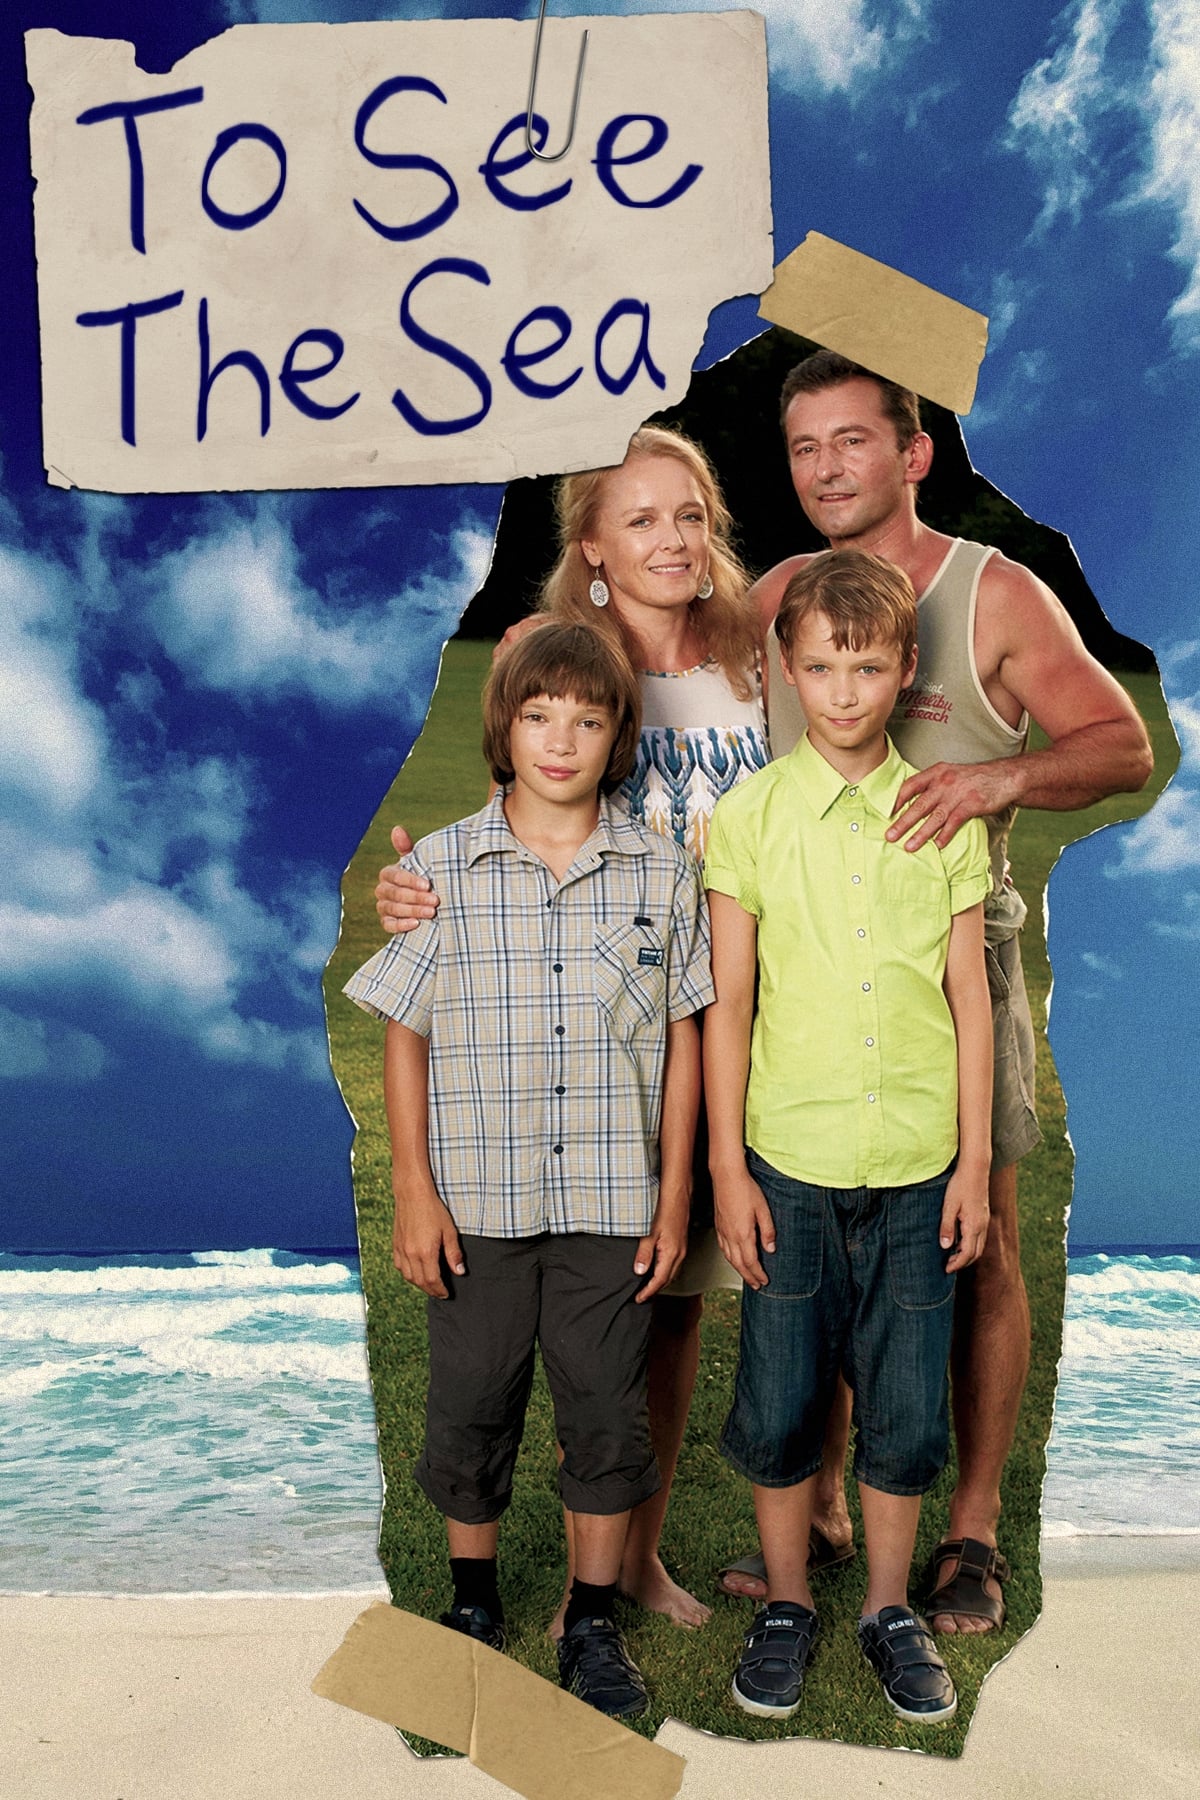 To See the Sea (2014)